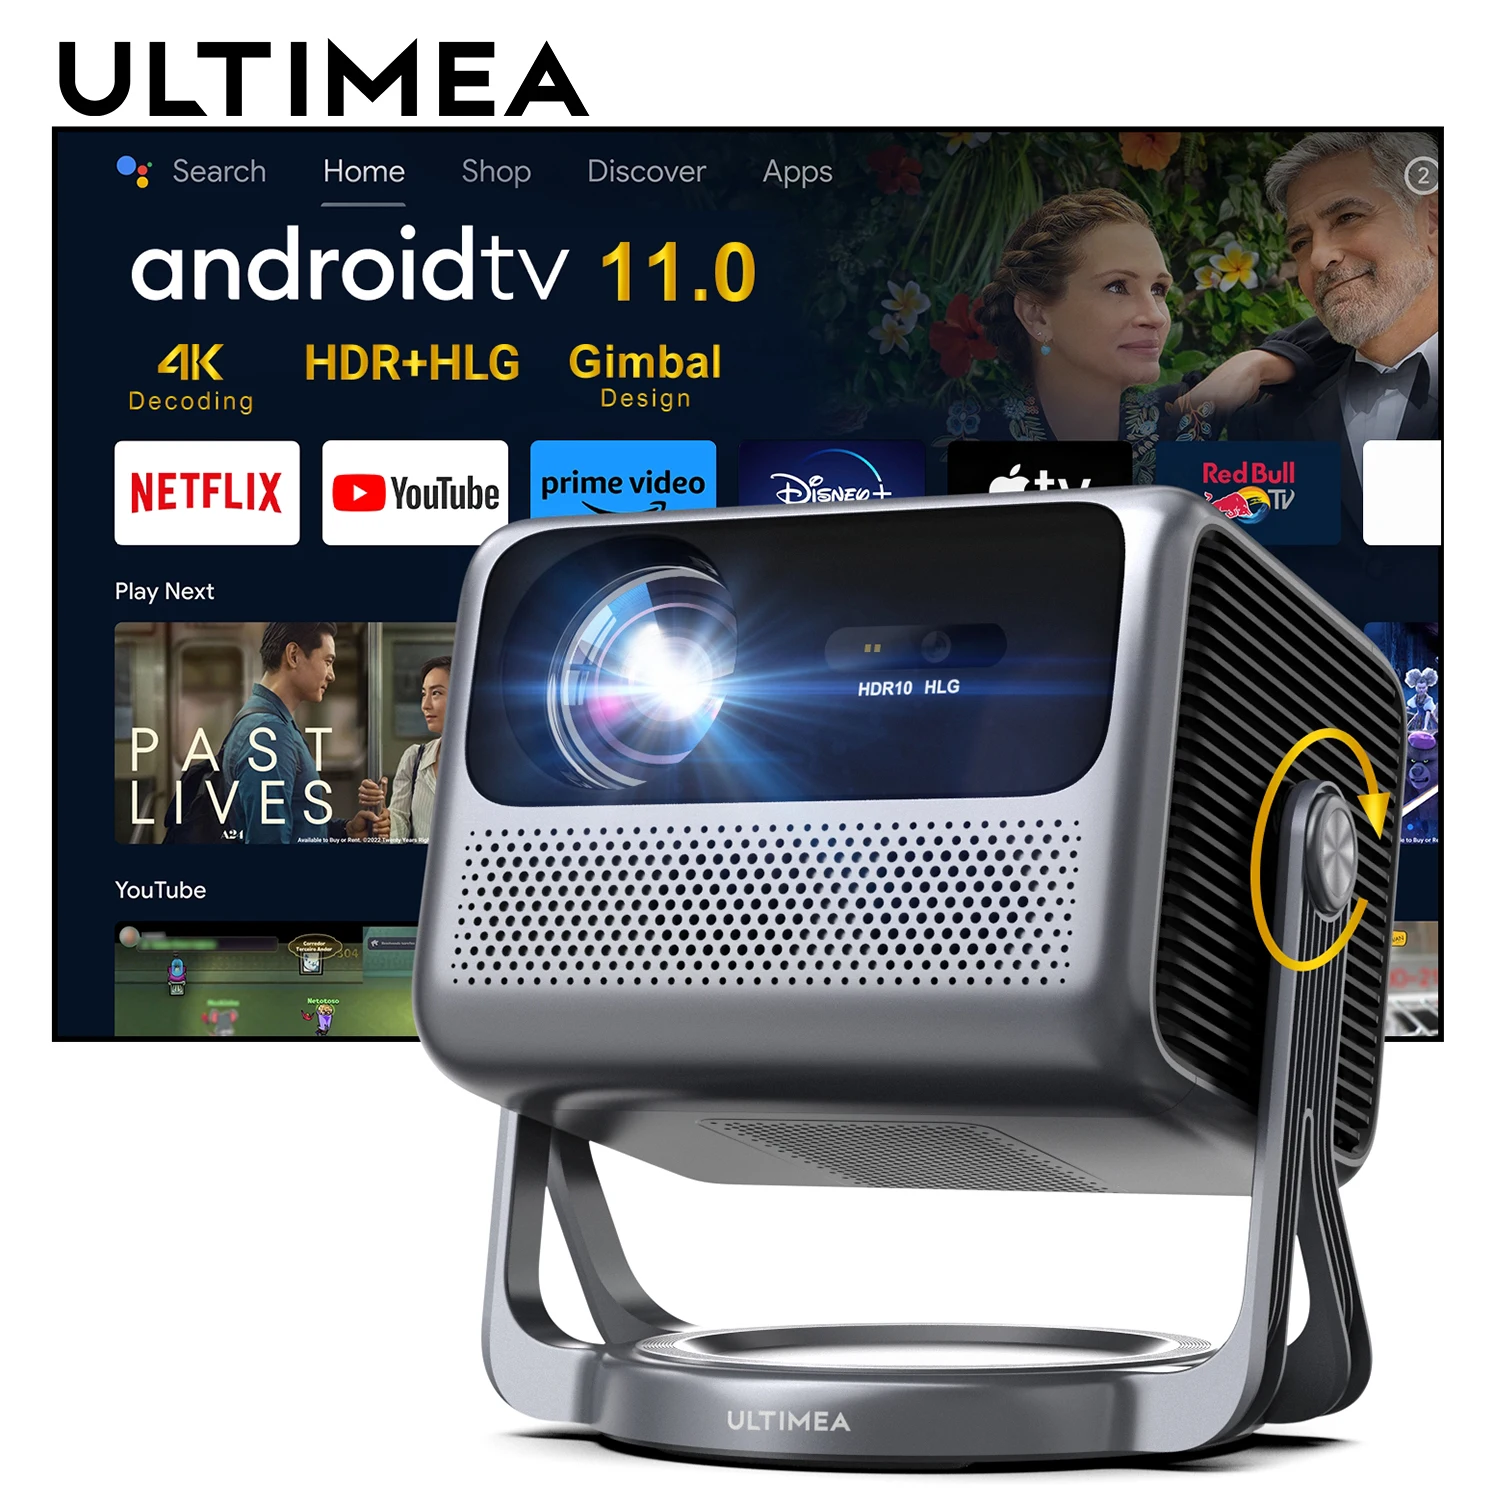 

ULTIMEA Full HD Smart Projector Android TV 11.0 with Netflix,4K Support Movie Projector with 90° Gimbal, Home Theater Projectors